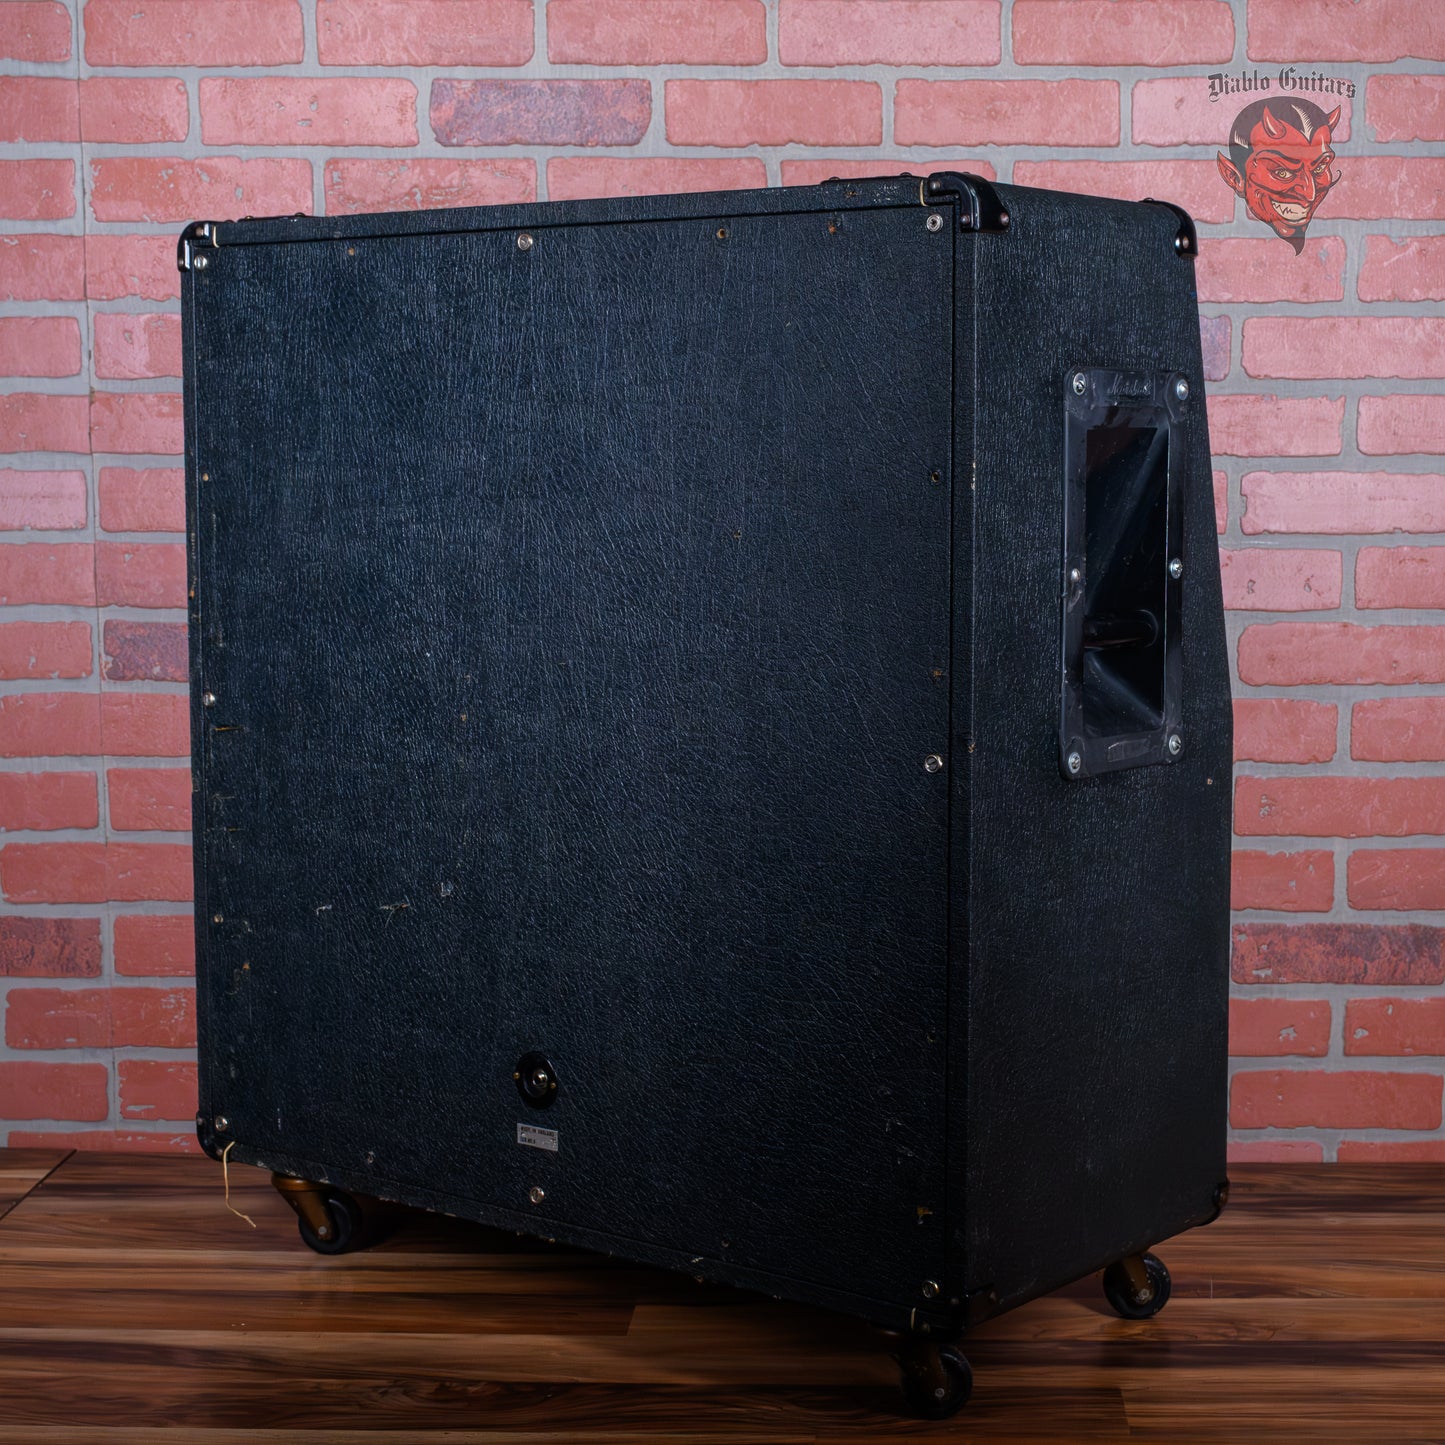 Marshall 1960A 4x12" Cabinet - Black w/ Checkerboard Grill